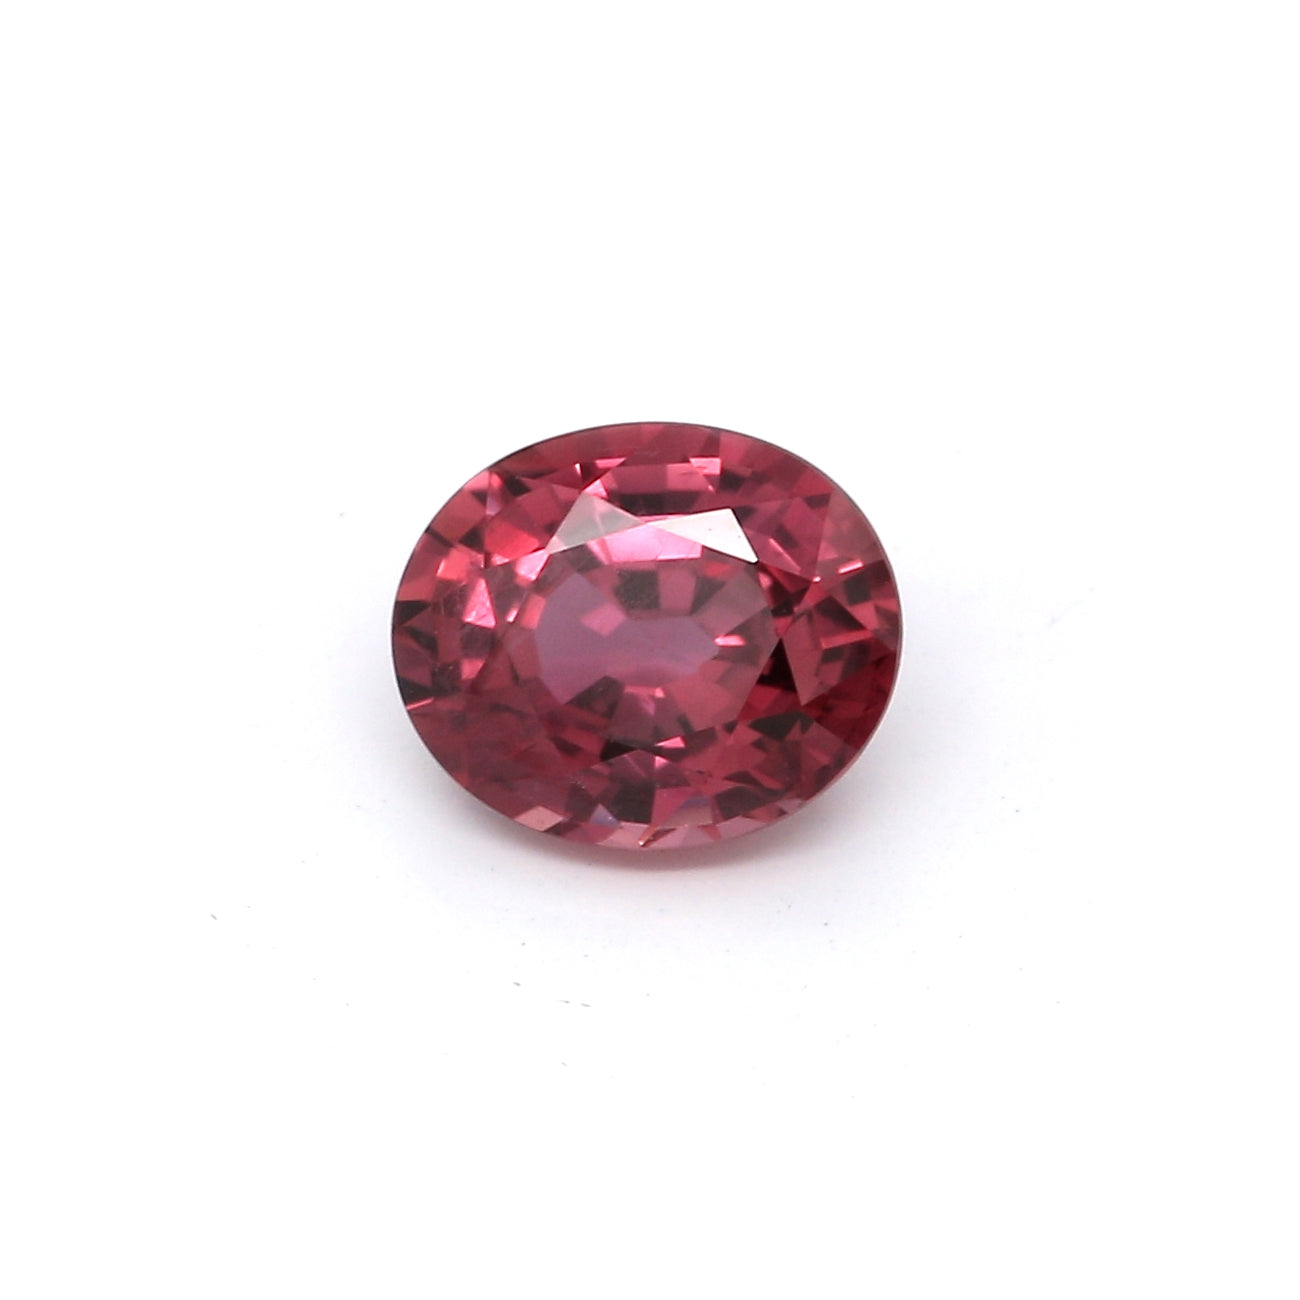 0.77ct Orangy Pink, Oval Sapphire, Heated, Thailand - 5.95 x 4.95 x 3.15mm